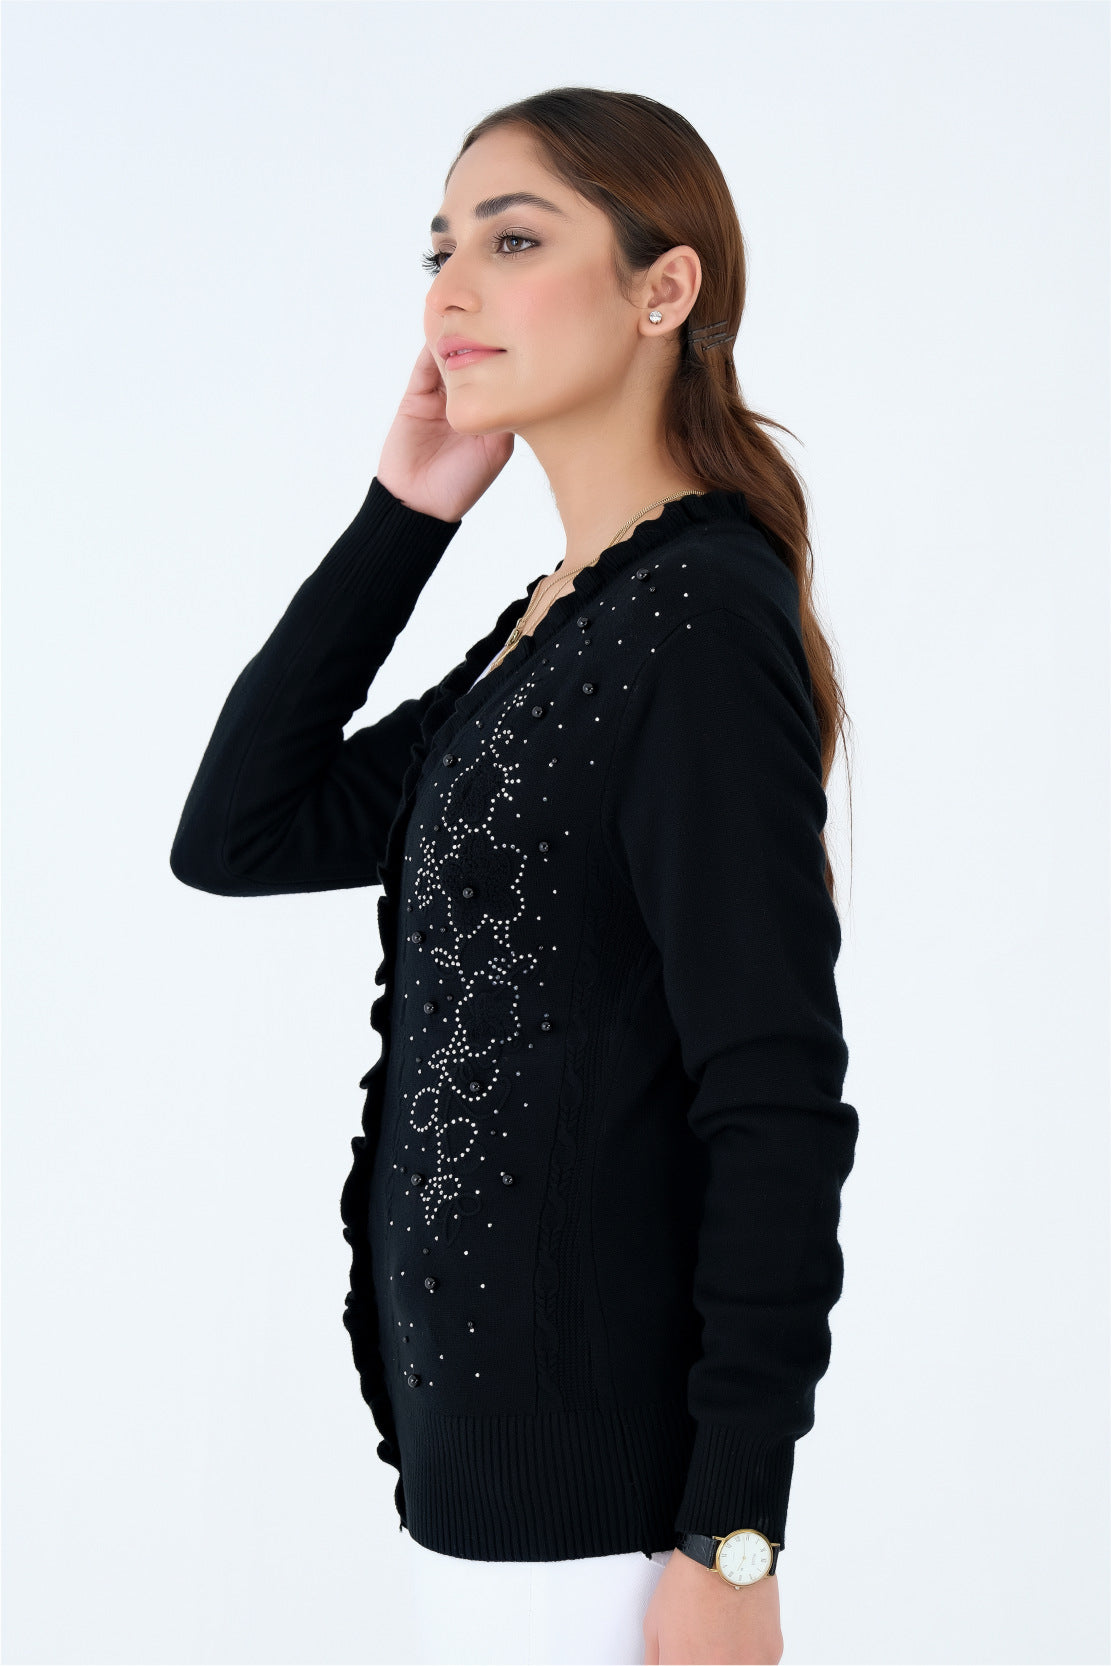 Embroided Black Sweater